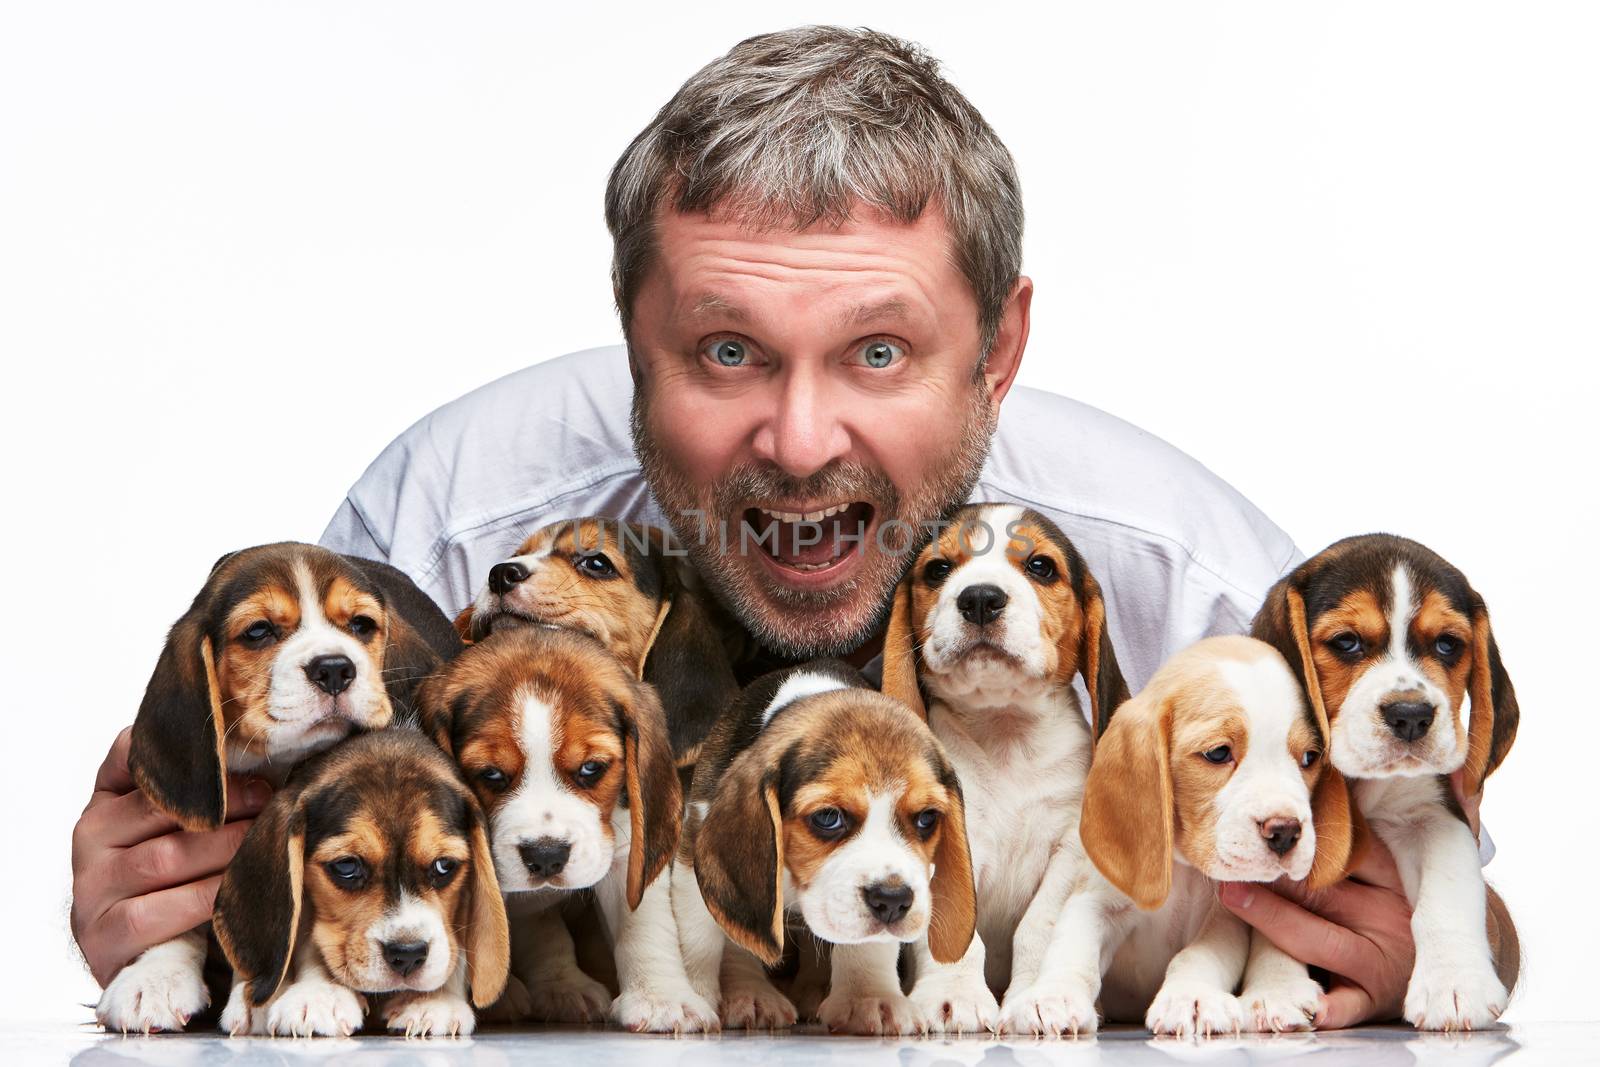 The happy man and big group of a beagle puppies on white background